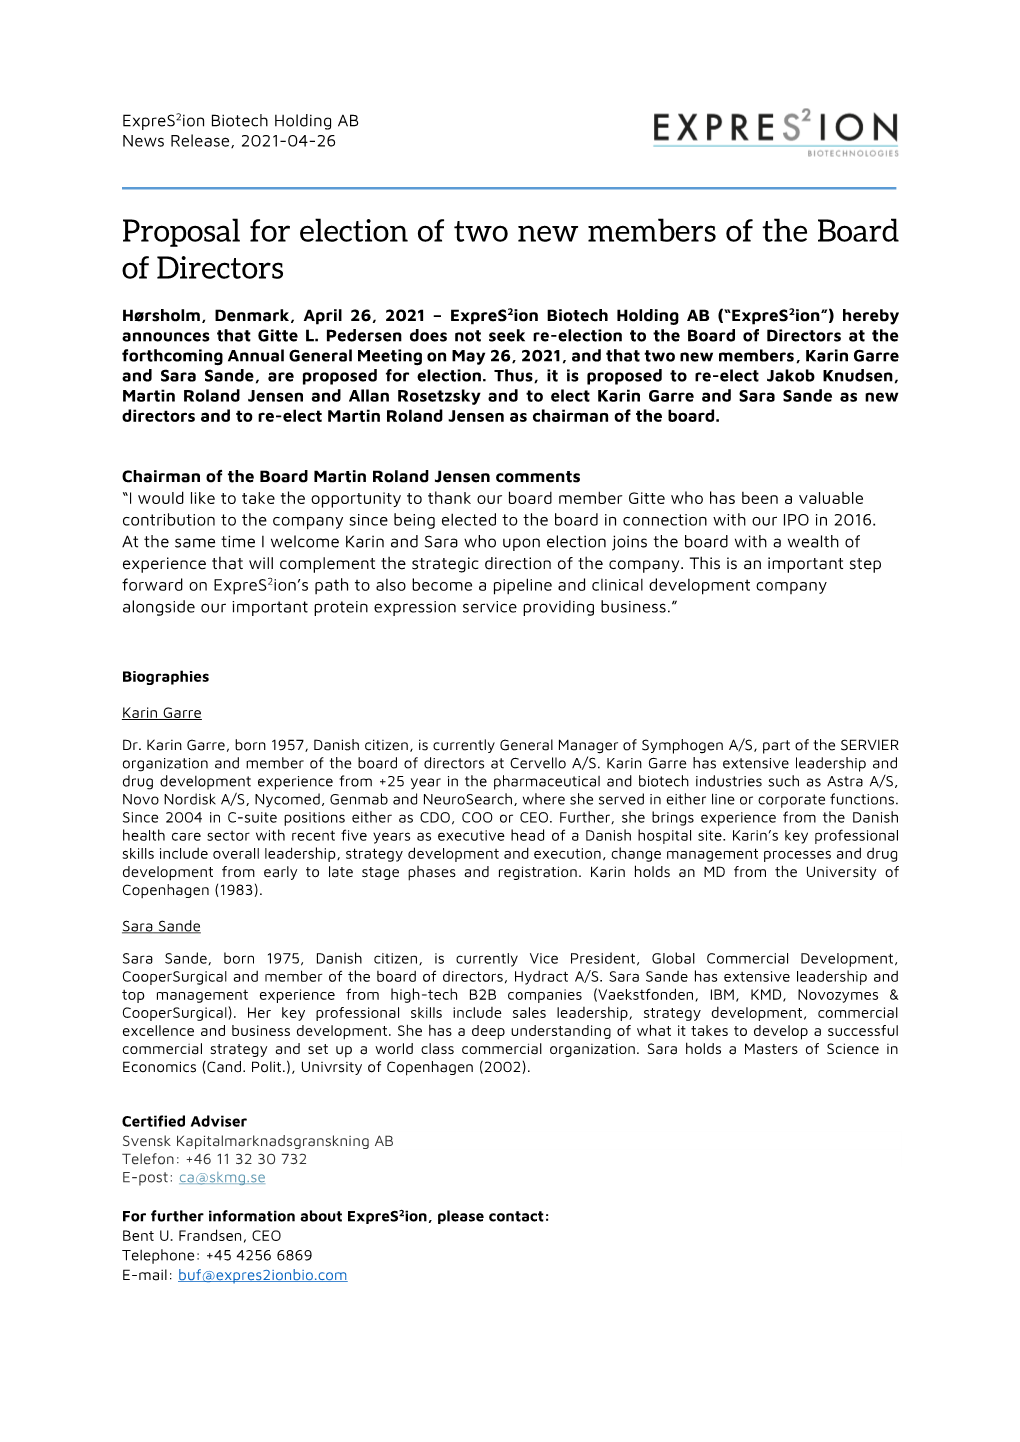 Proposal for Election of Two New Members of the Board of Directors